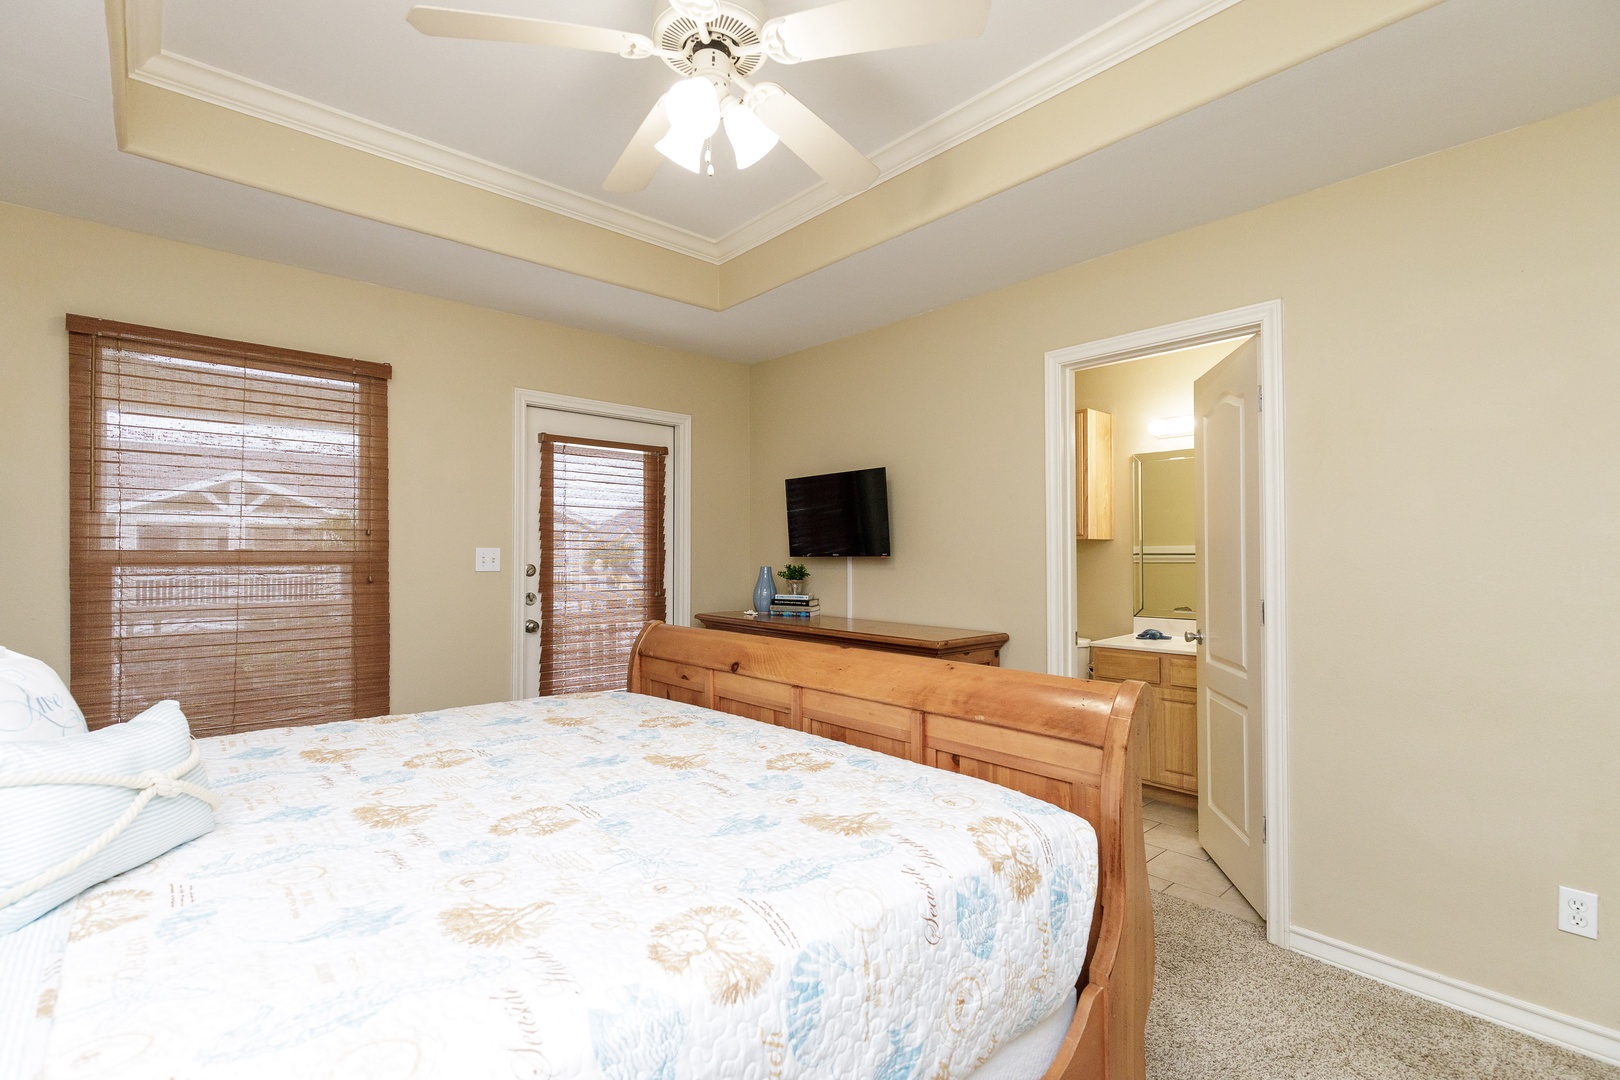 This 3rd-floor king suite offers a private ensuite bath, Smart TV, & deck access